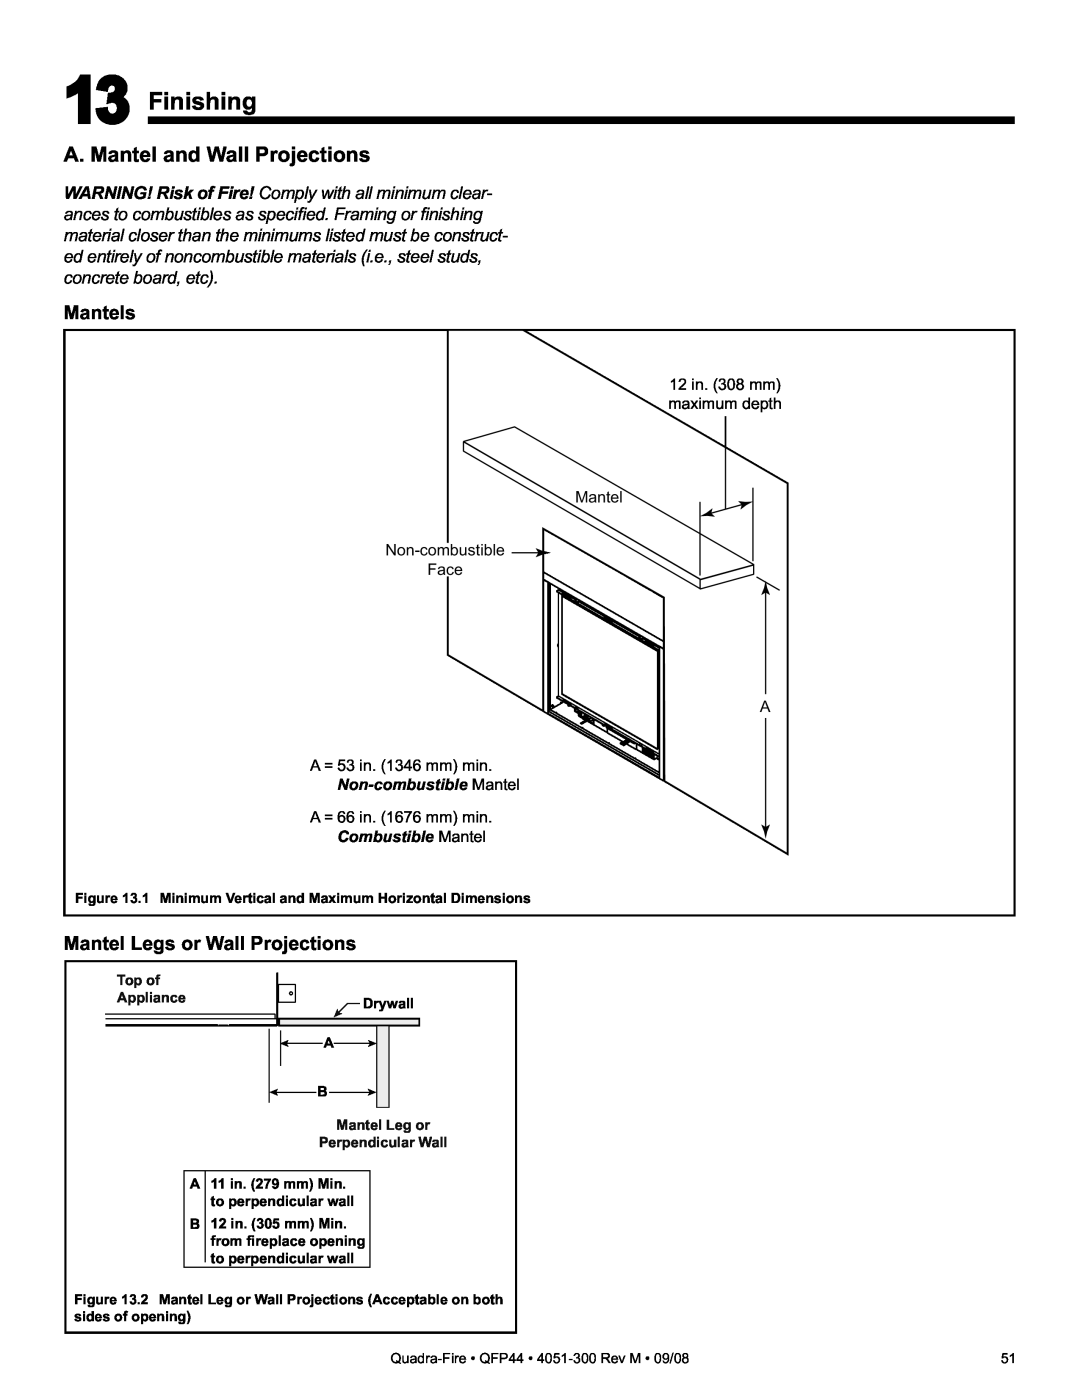 Quadra-Fire QFP44 owner manual Finishing, A. Mantel and Wall Projections, Mantels, Mantel Legs or Wall Projections 